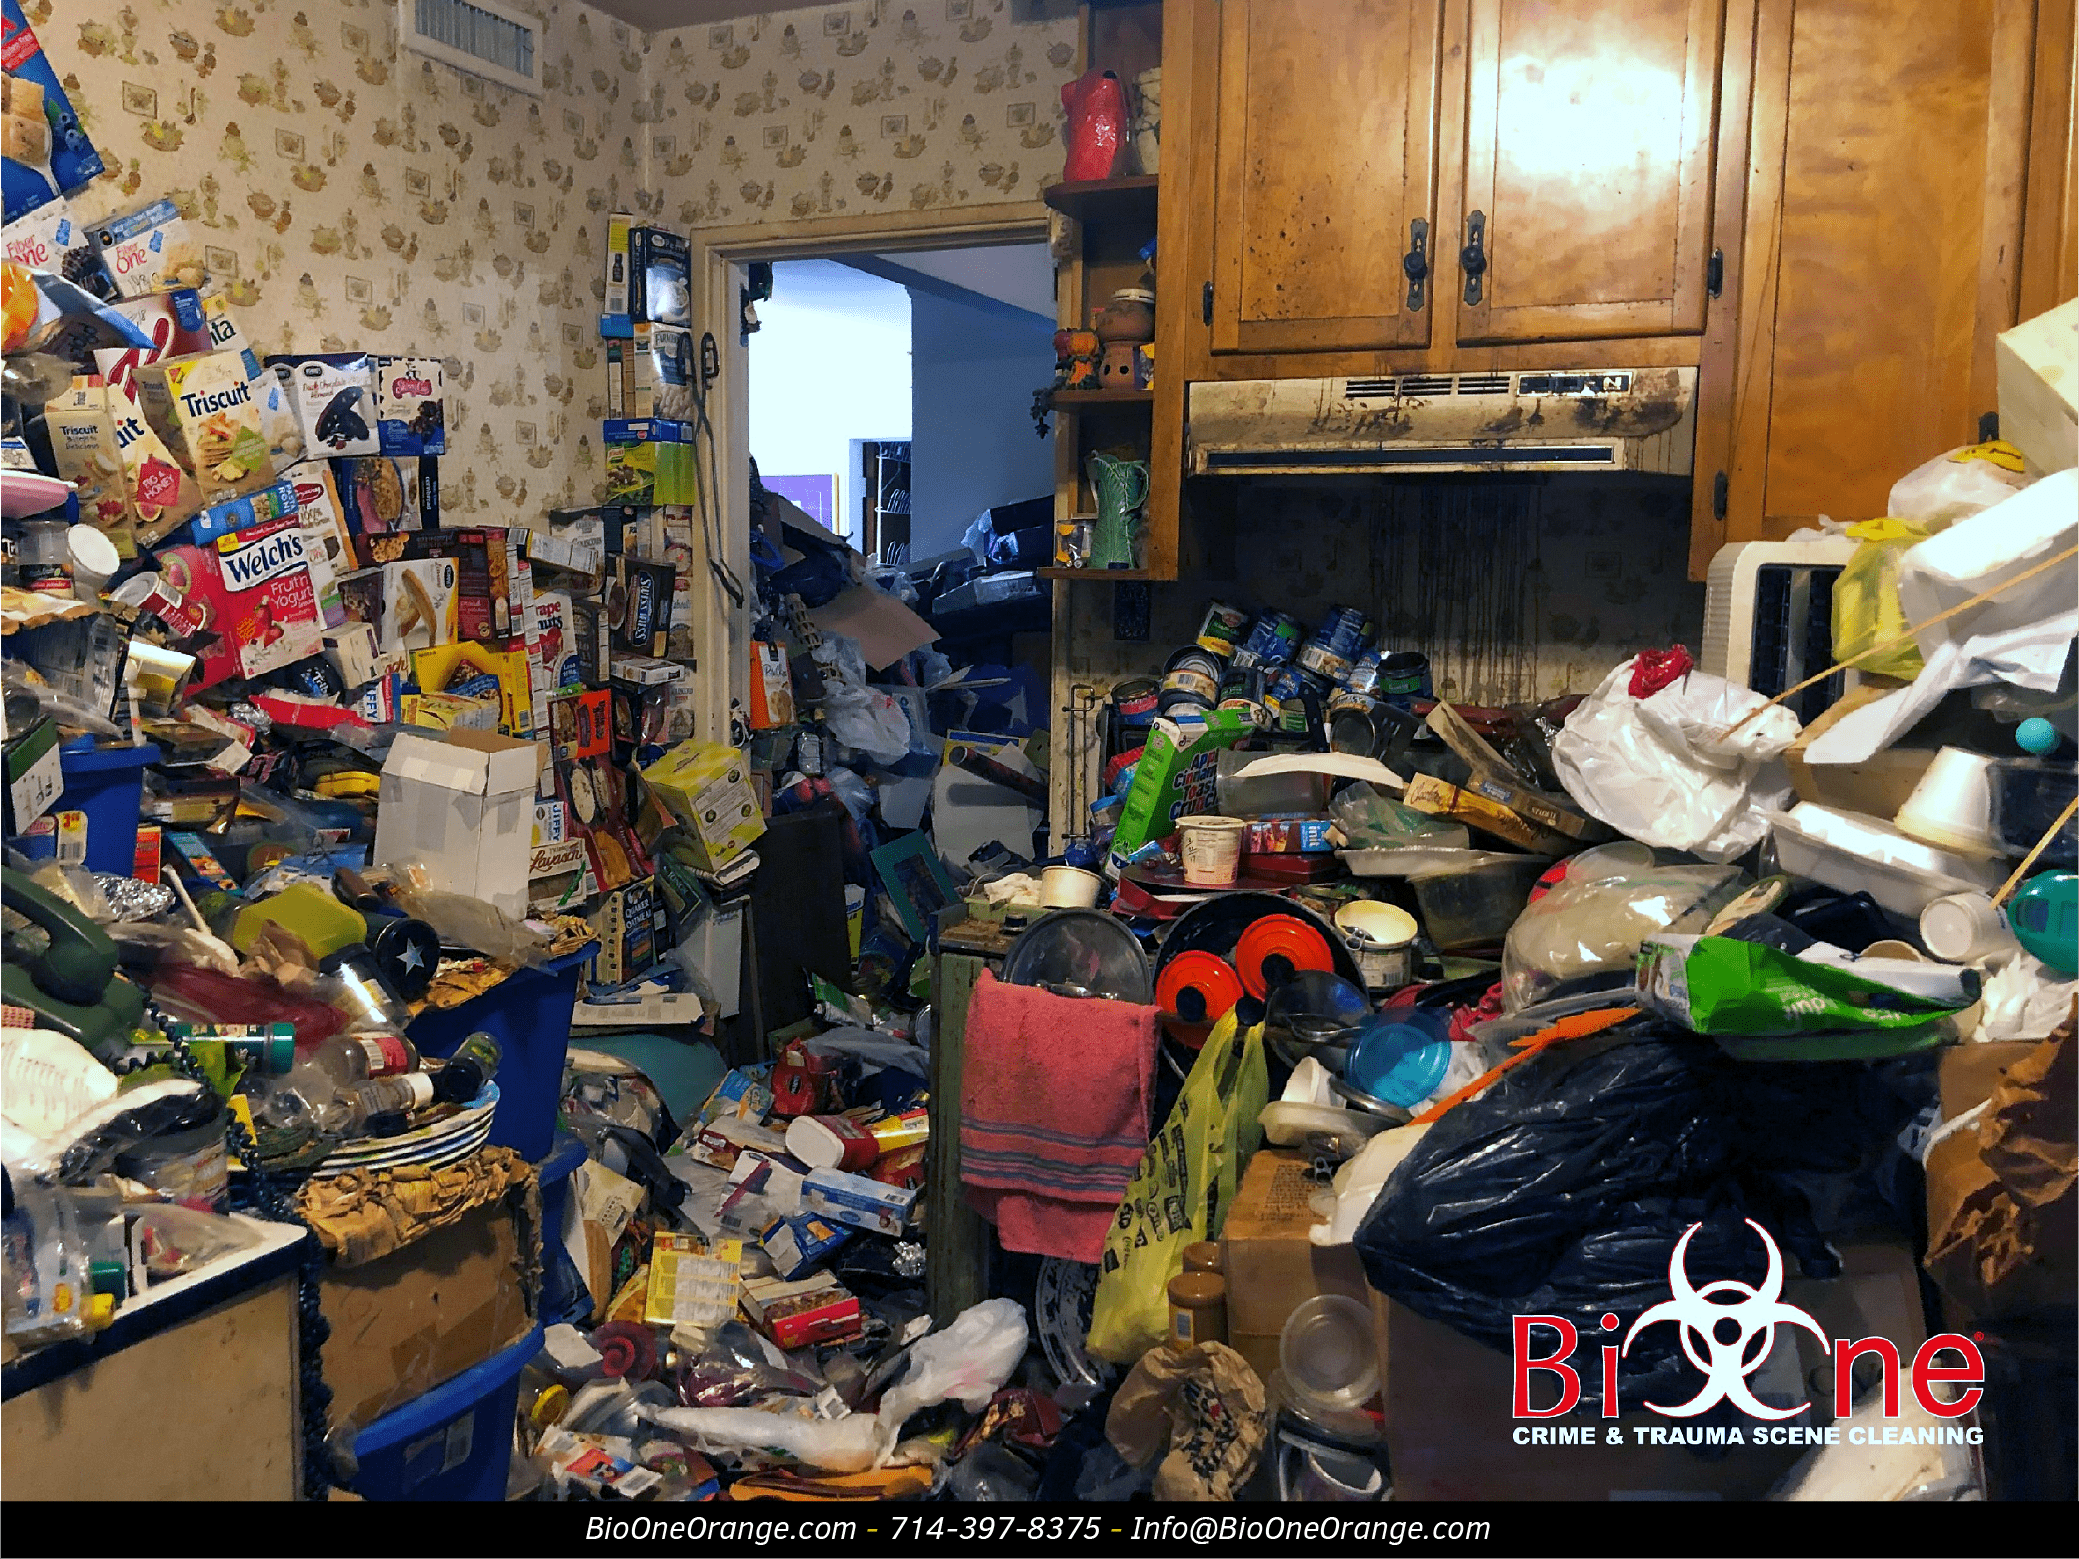 Image shows a severely cluttered kitchen with piles of debris and waste.